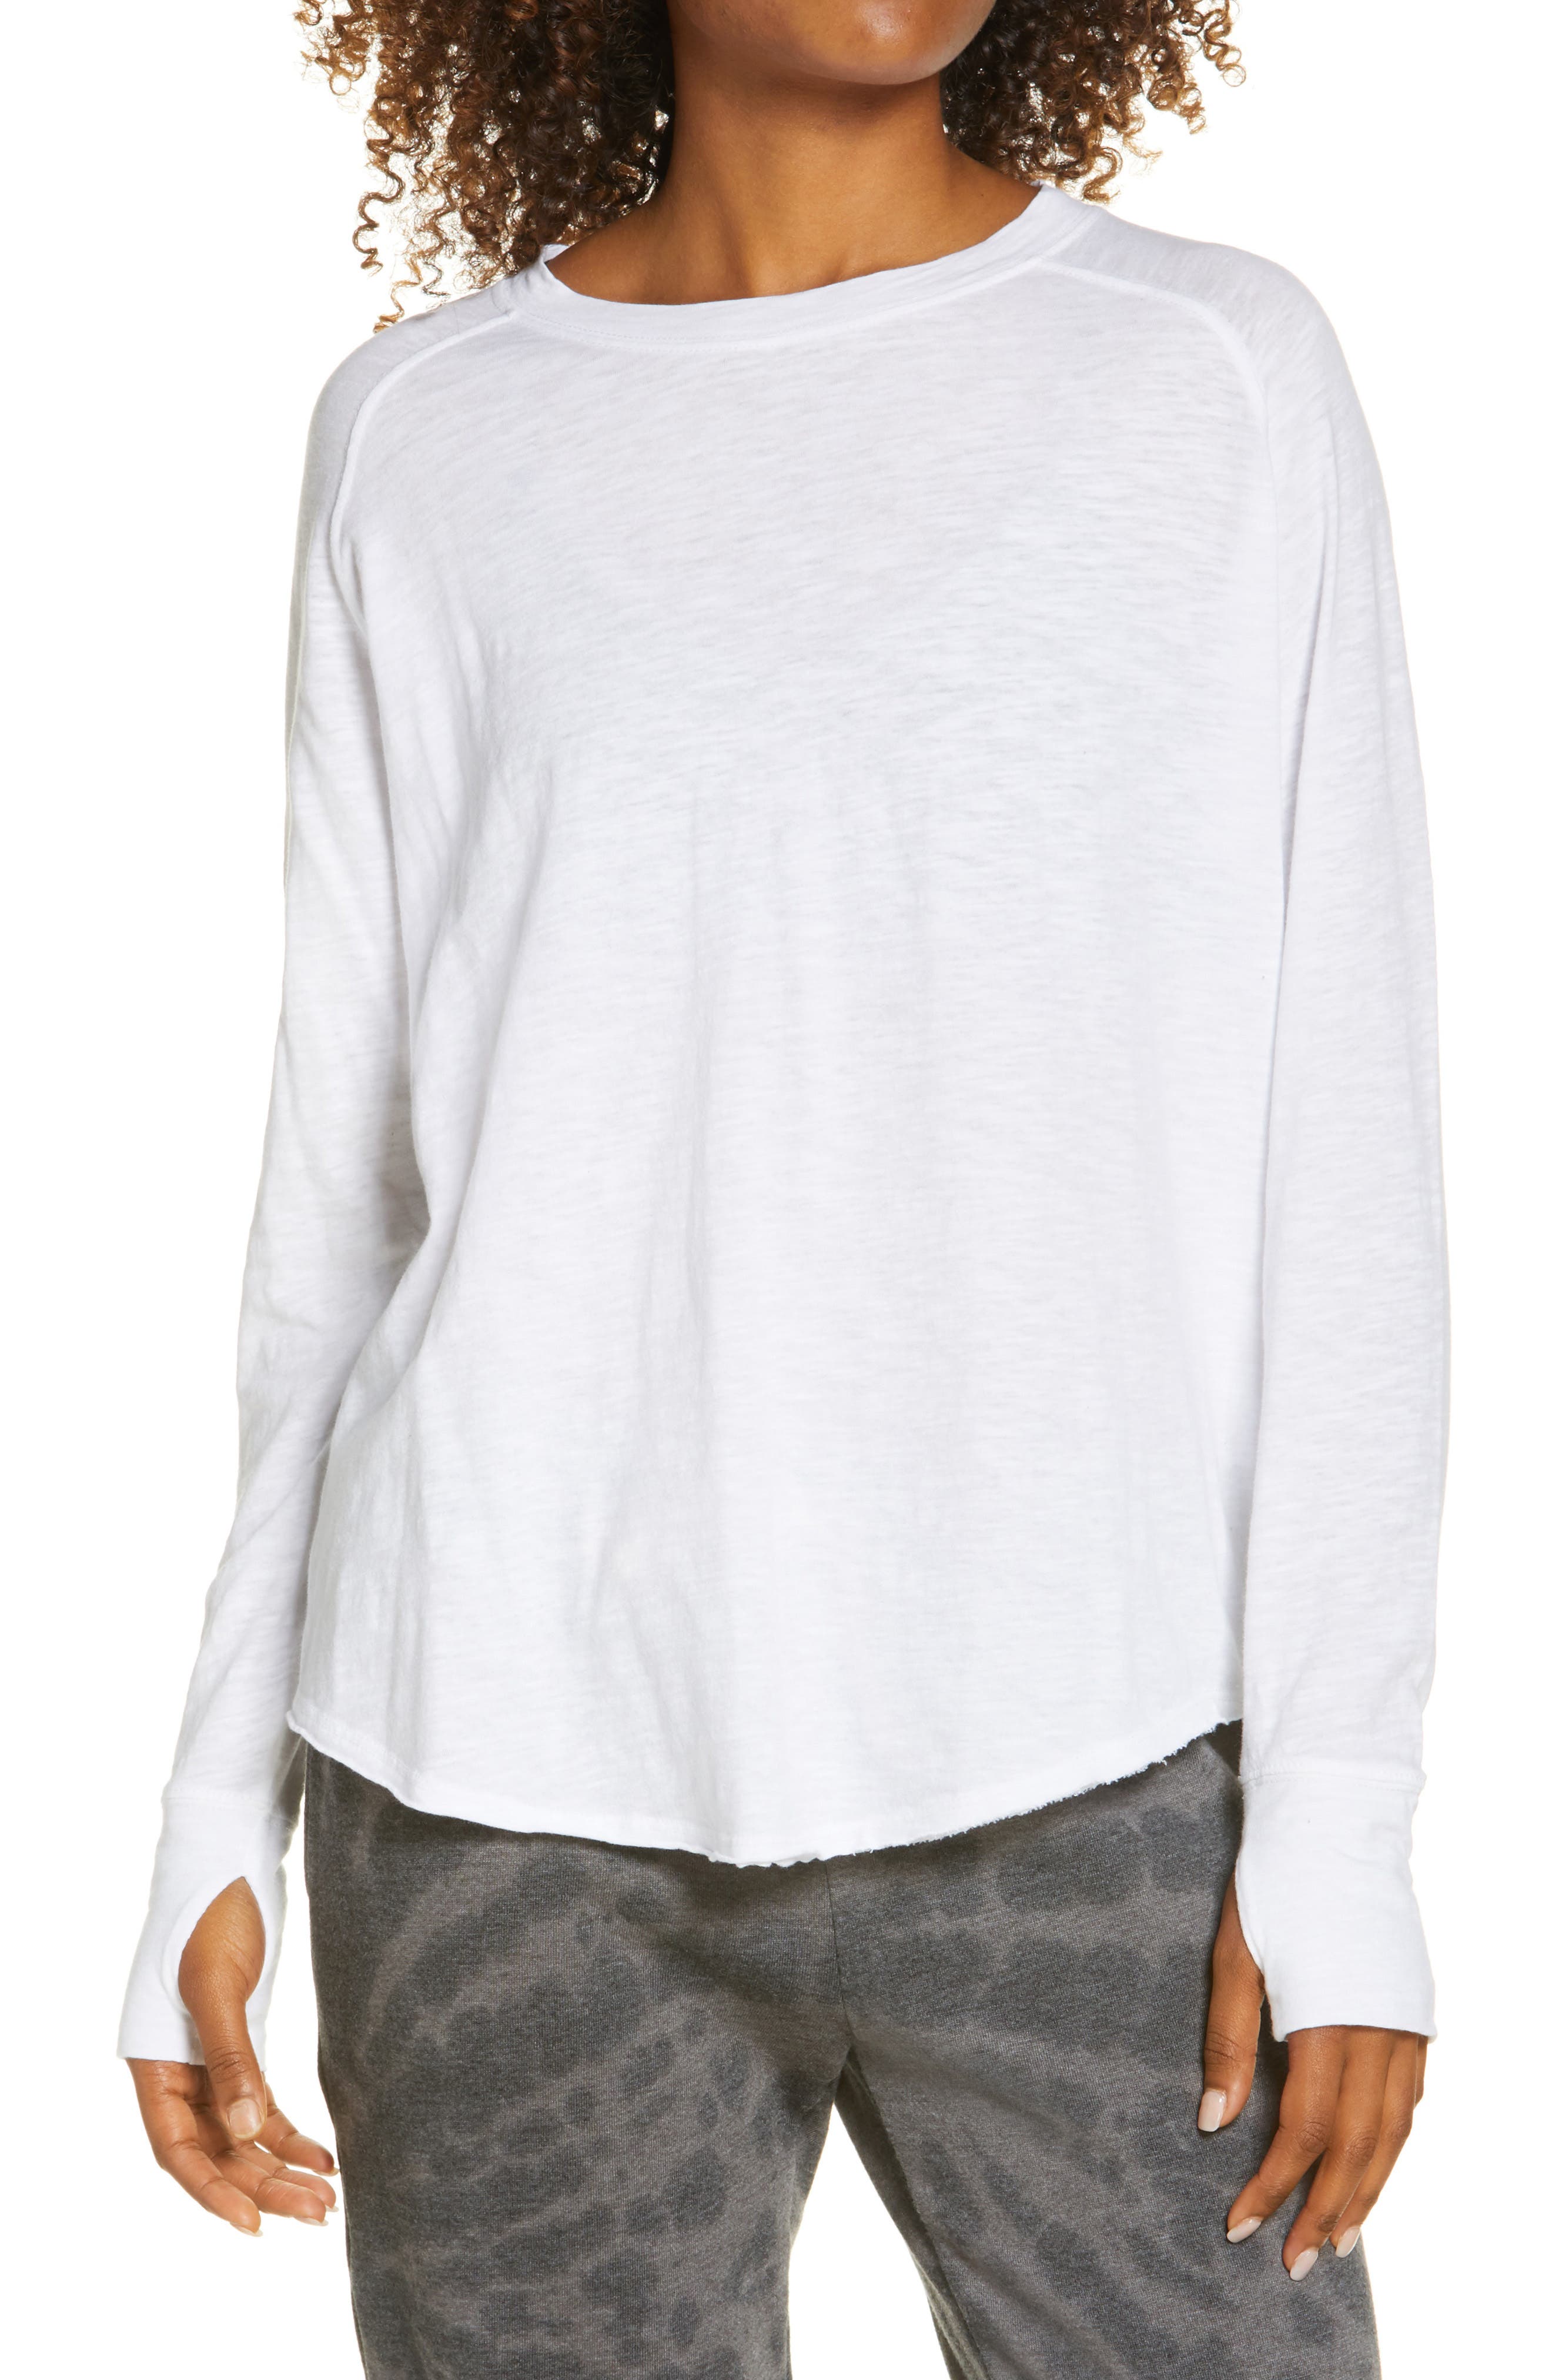 Famulily Casual Plain Crewneck Split Side Cotton Long Sleeve Tops Tee Shirts with Pockets